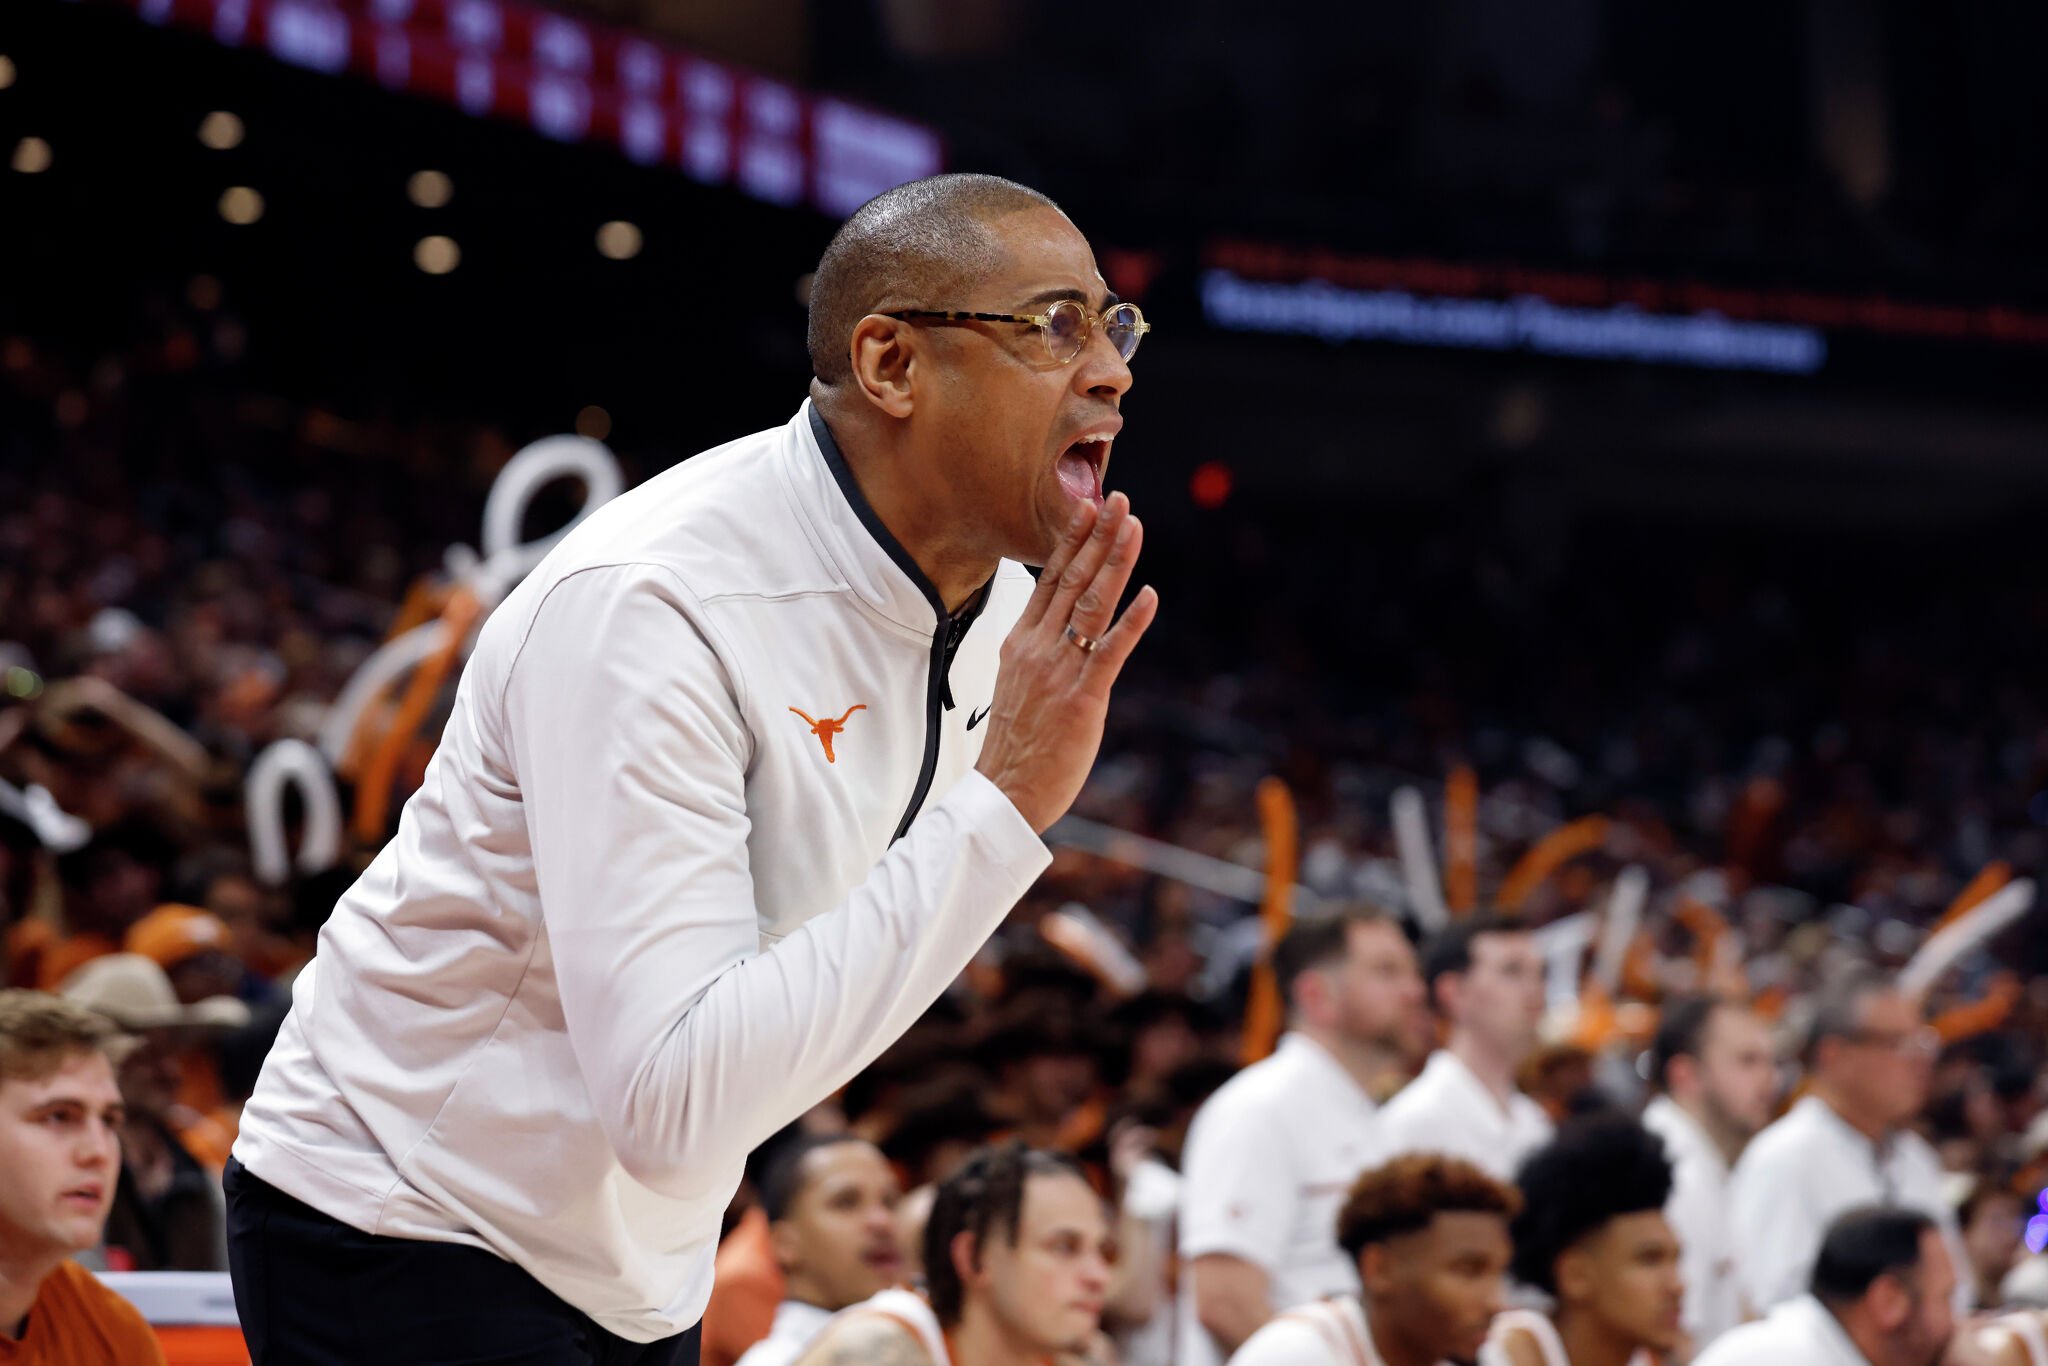 Texas' Rodney Terry earns national coach of the year honors